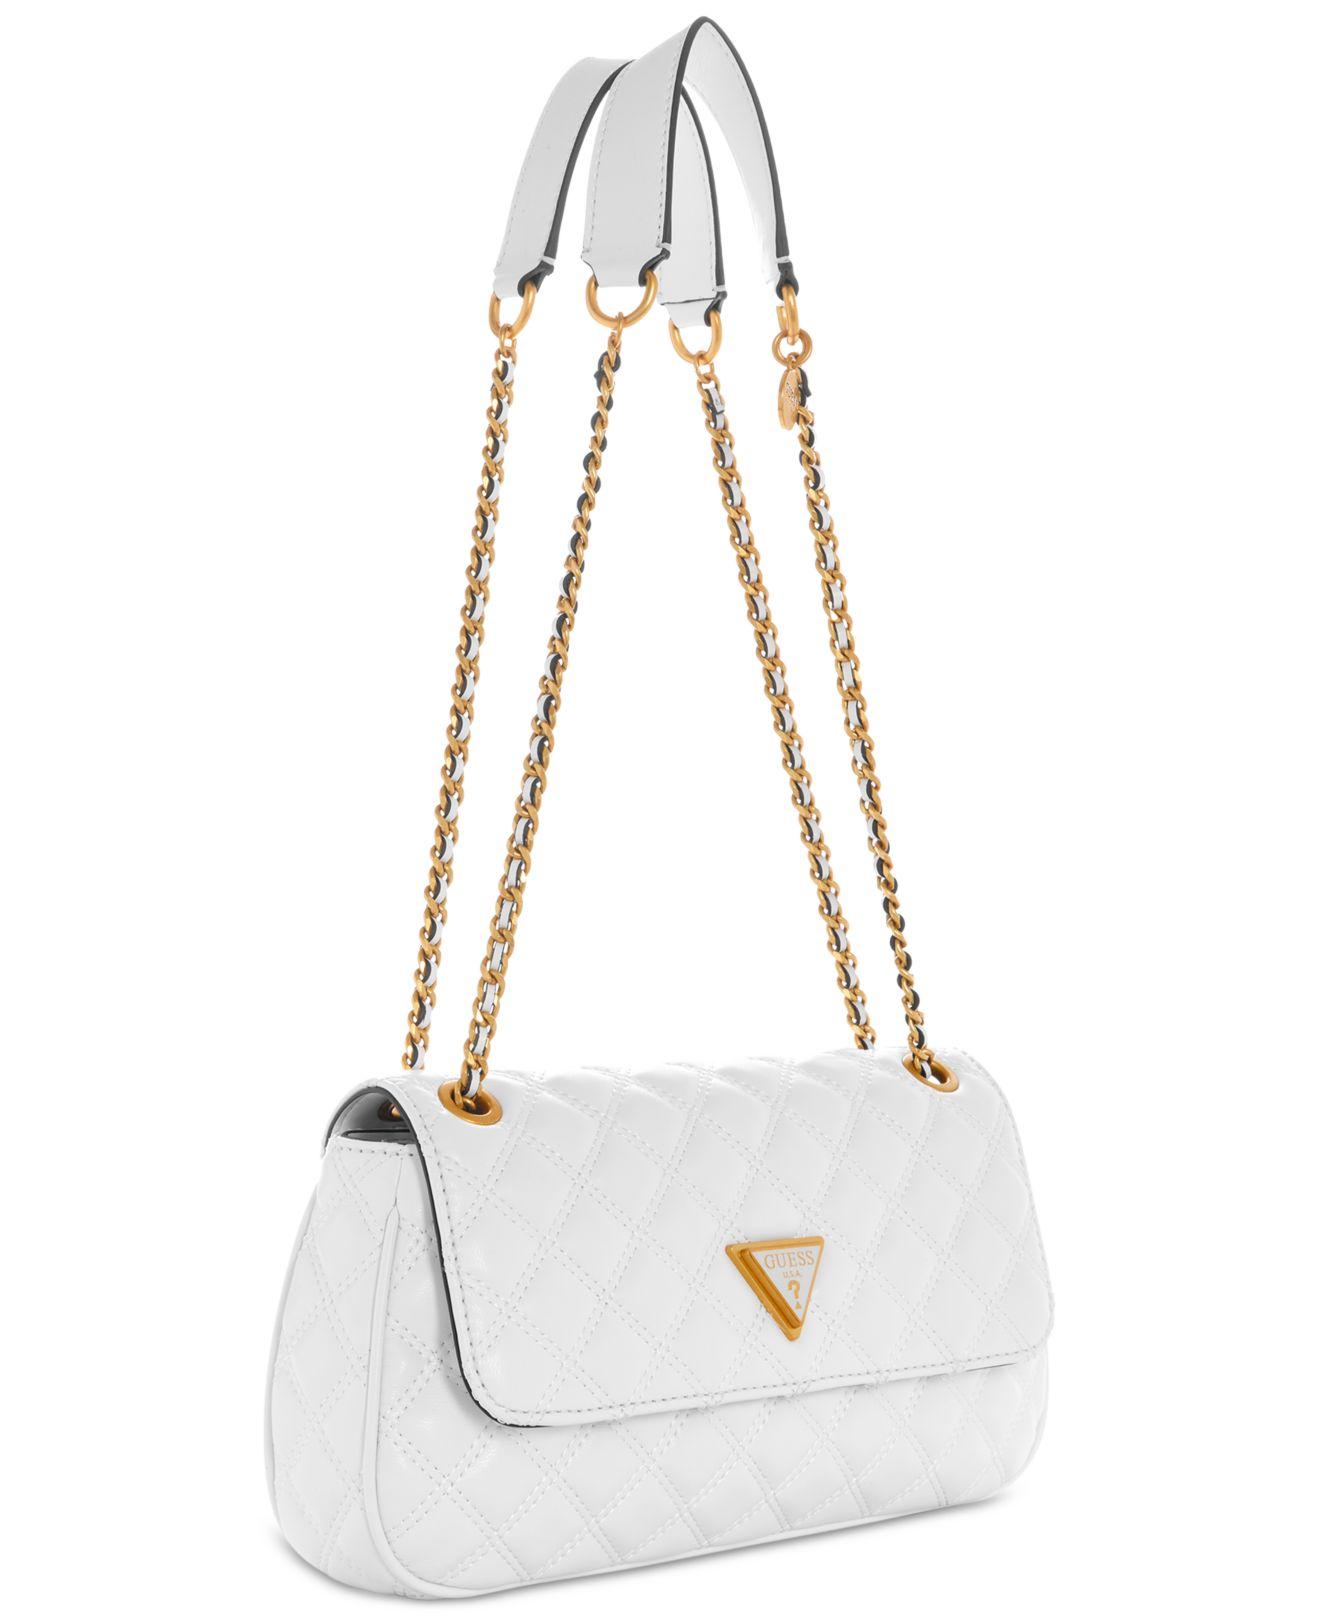 Guess Giully Top Zip Shoulder Bag White